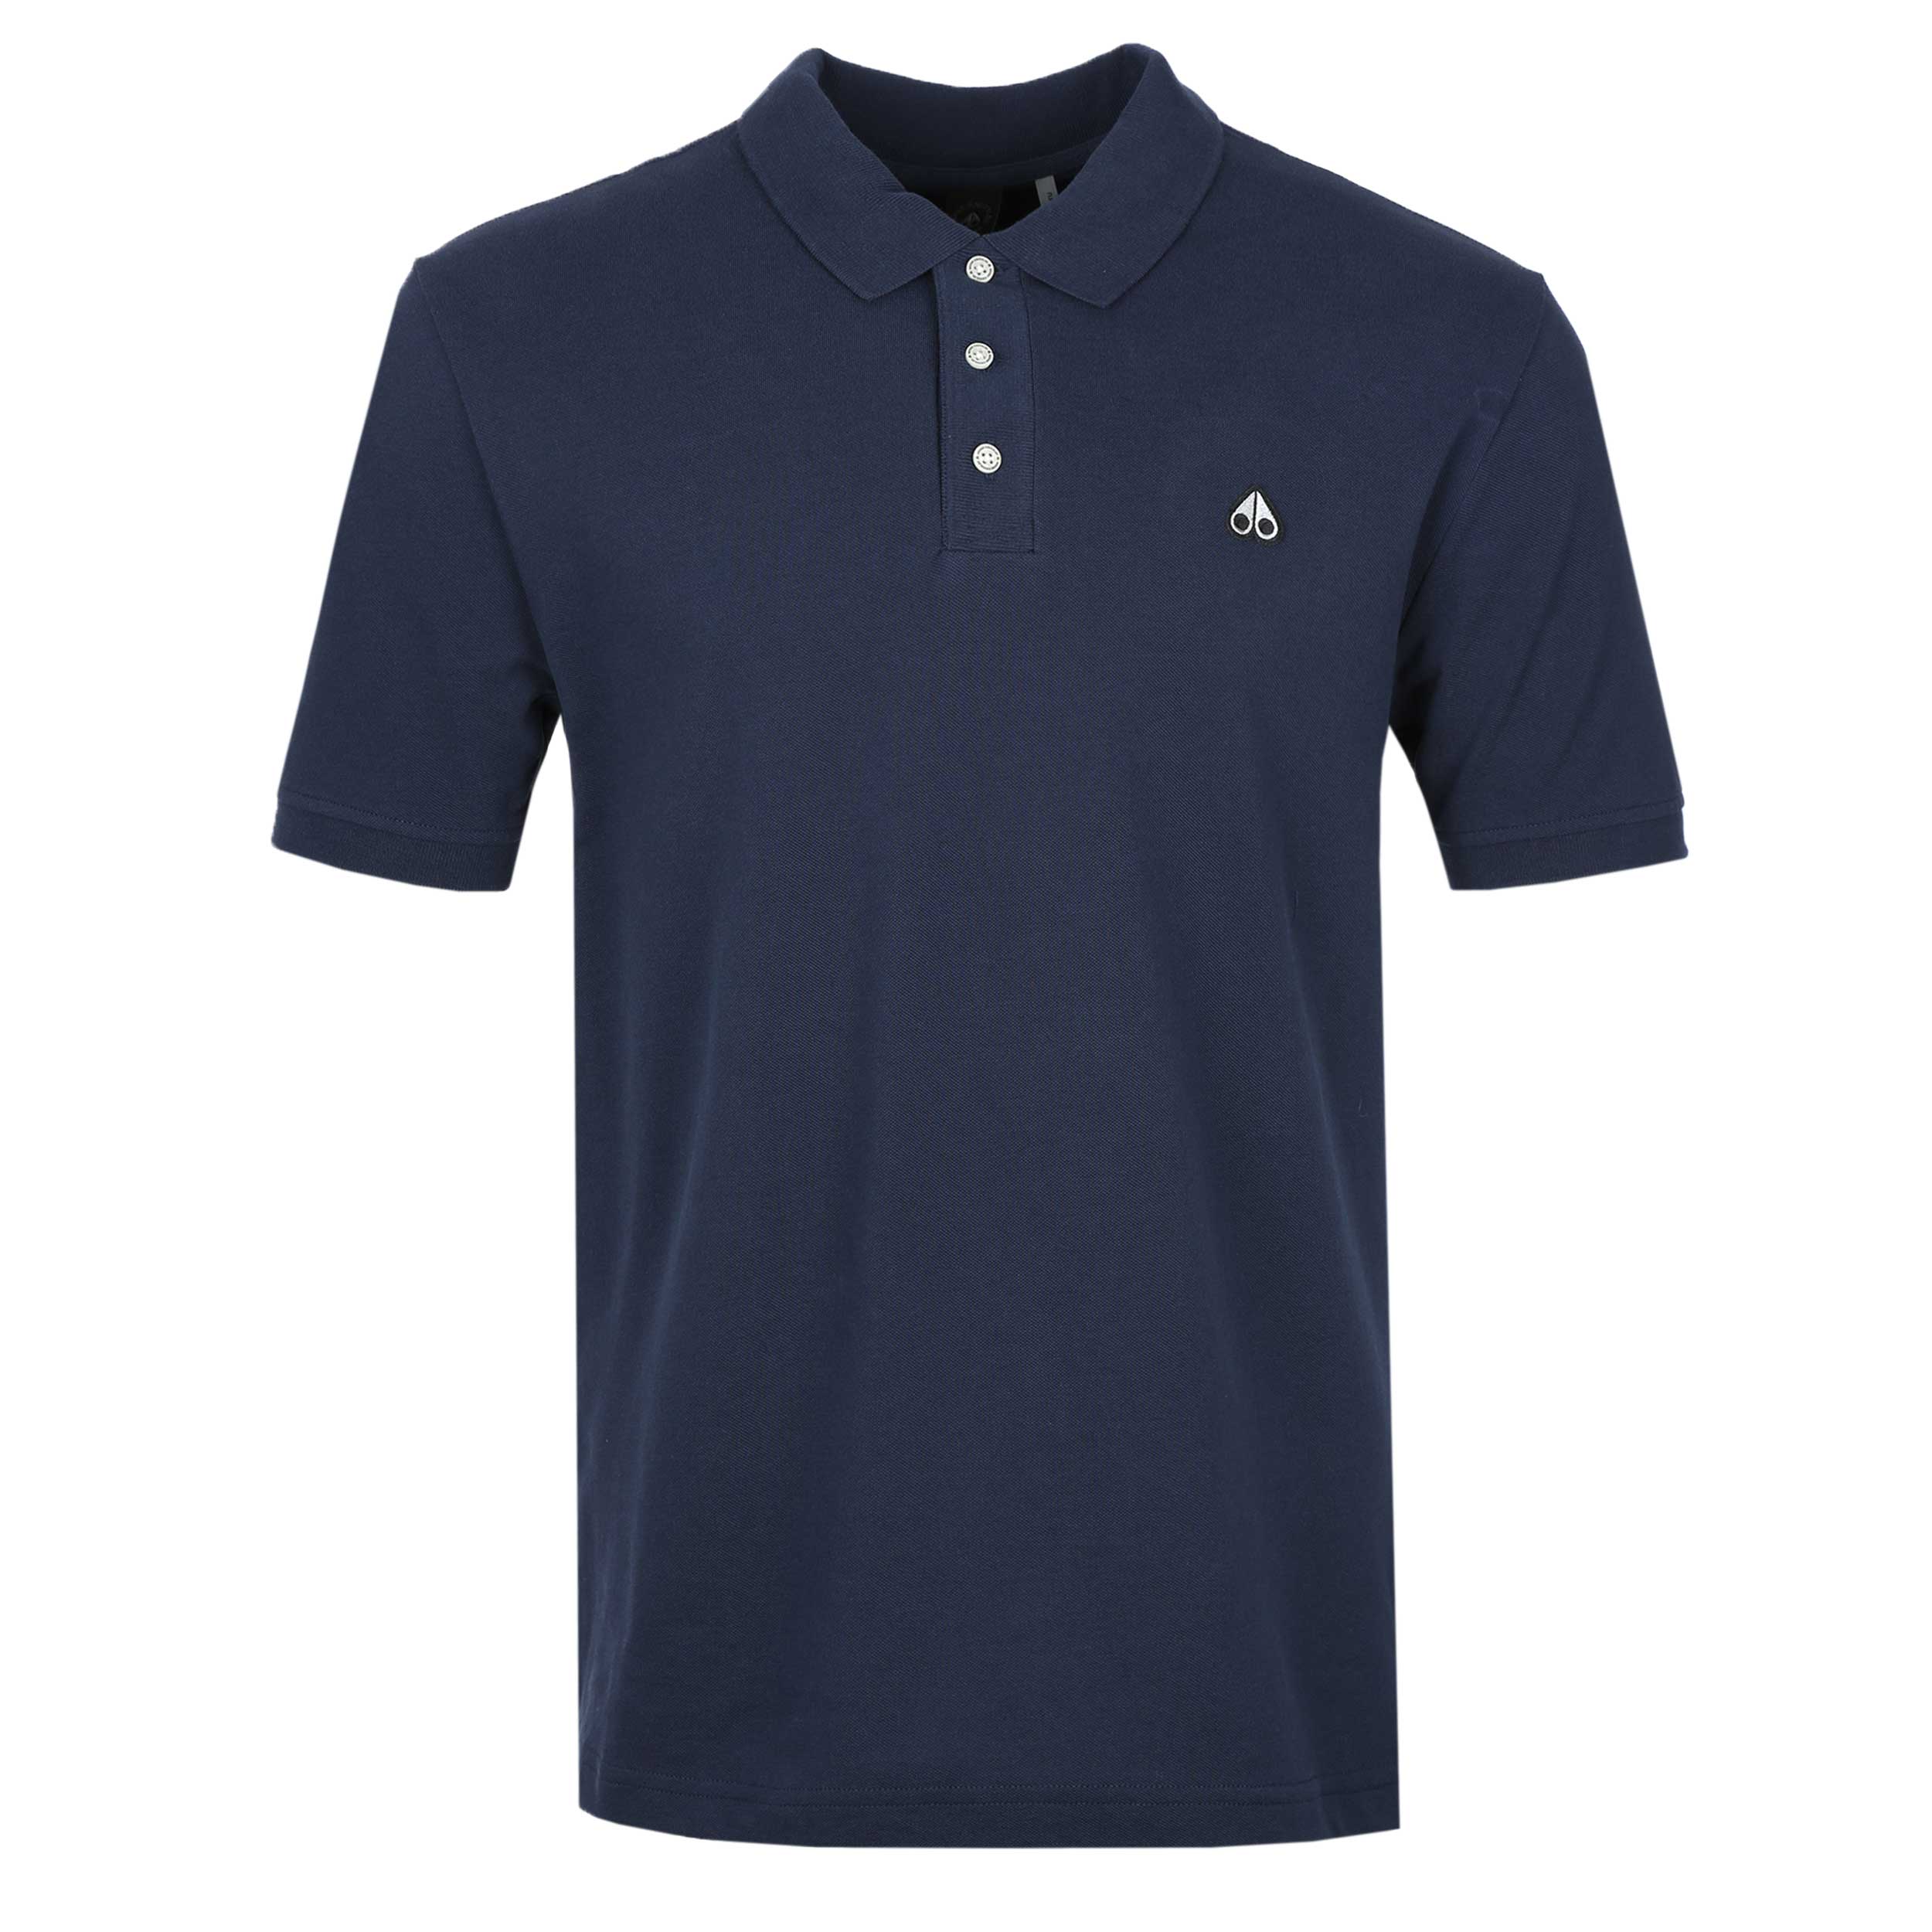 Moose Knuckles Pique Polo Shirt in Navy |Moose Knuckles | Norton Barrie